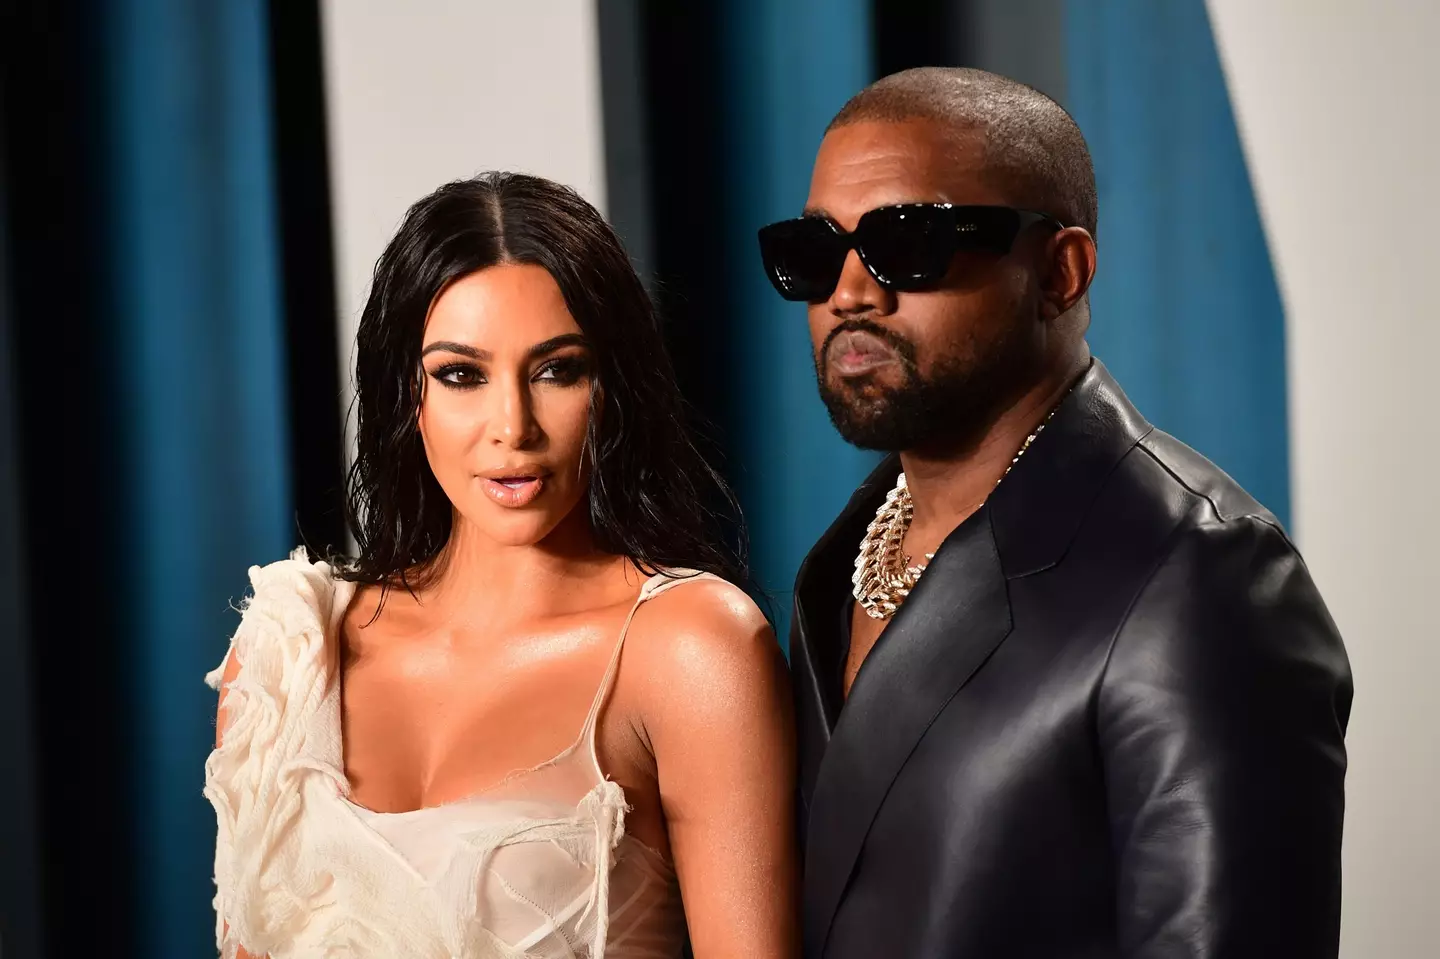 Kanye West is alleged to have shown an intimate photo of his ex Kim Kardashian to former employees.